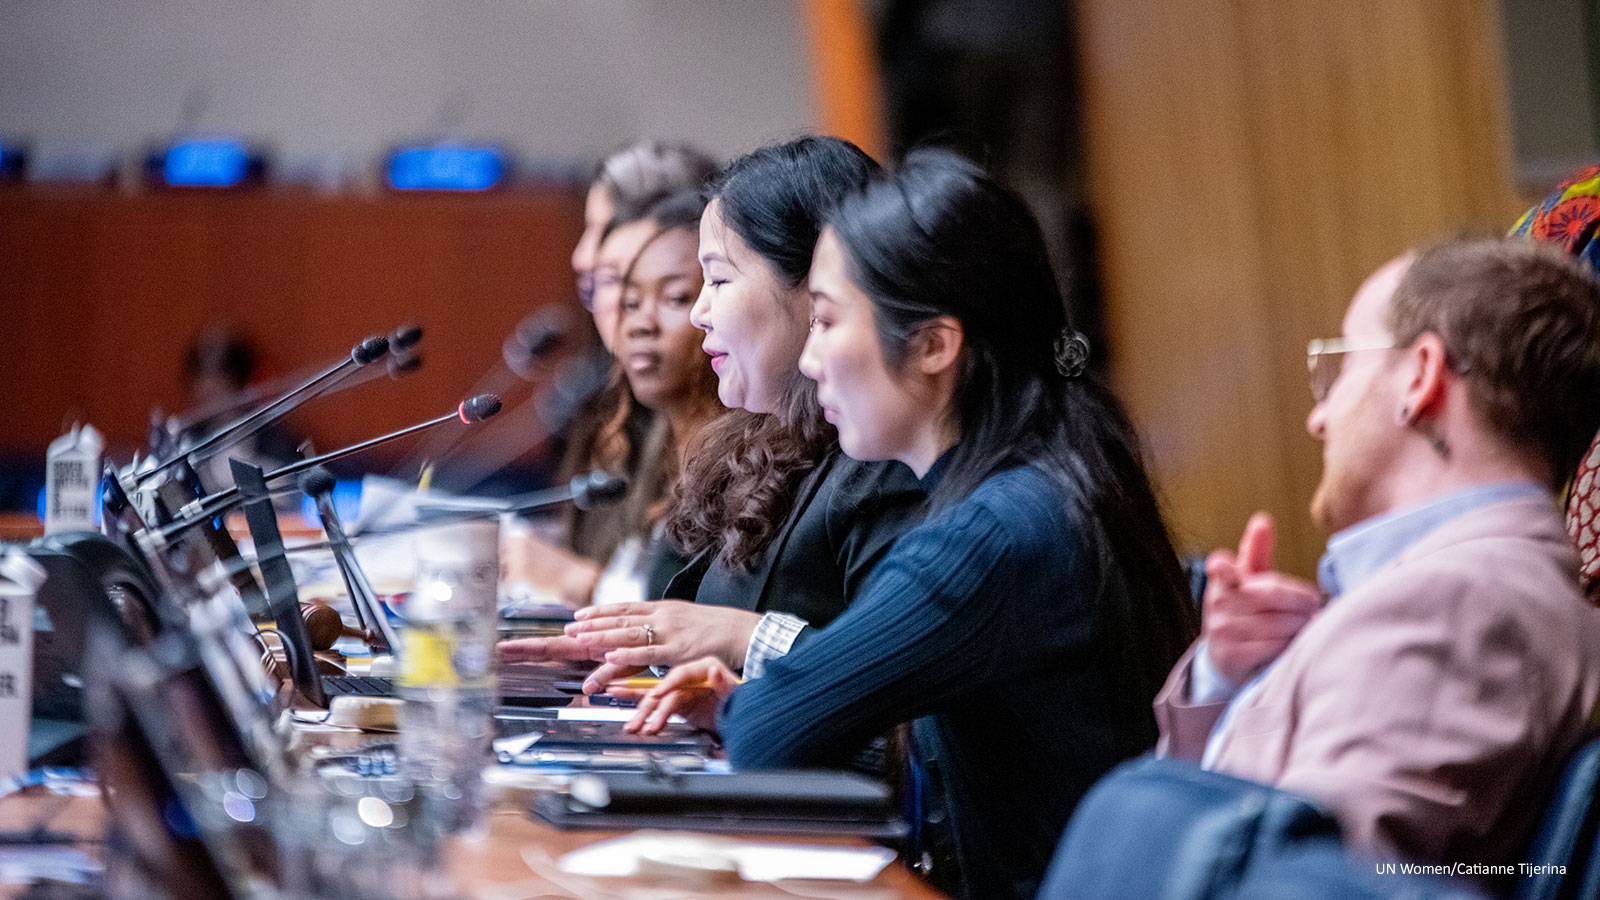 The dialogue was led by a panel of youth activists from around the world: Oscar Noel Fitzpatrick of Ireland; Alison Adrian Berbetty Omiste of Bolivia; Hawa Yokie of Sierra Leone; Aisha Mehmood of Pakistan; and Milica Knežević of Serbia. Photo: UN Women/Catianne Tijerina